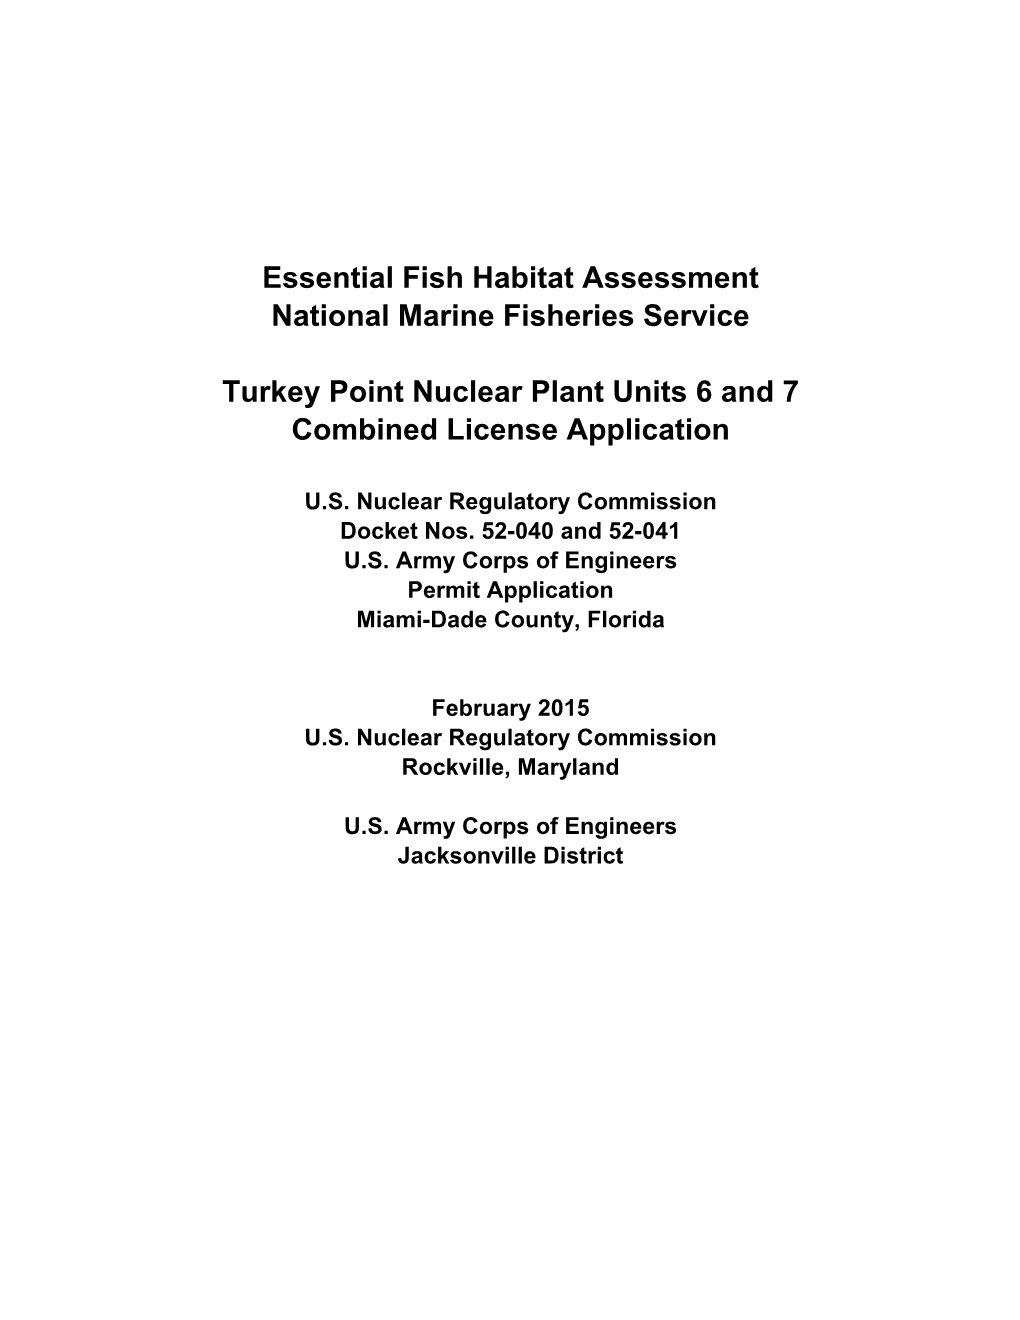 Essential Fish Habitat Assessment, National Marine Fisheries Service, Turkey Point Nuclear Plant Units 6 and 7 Combined License